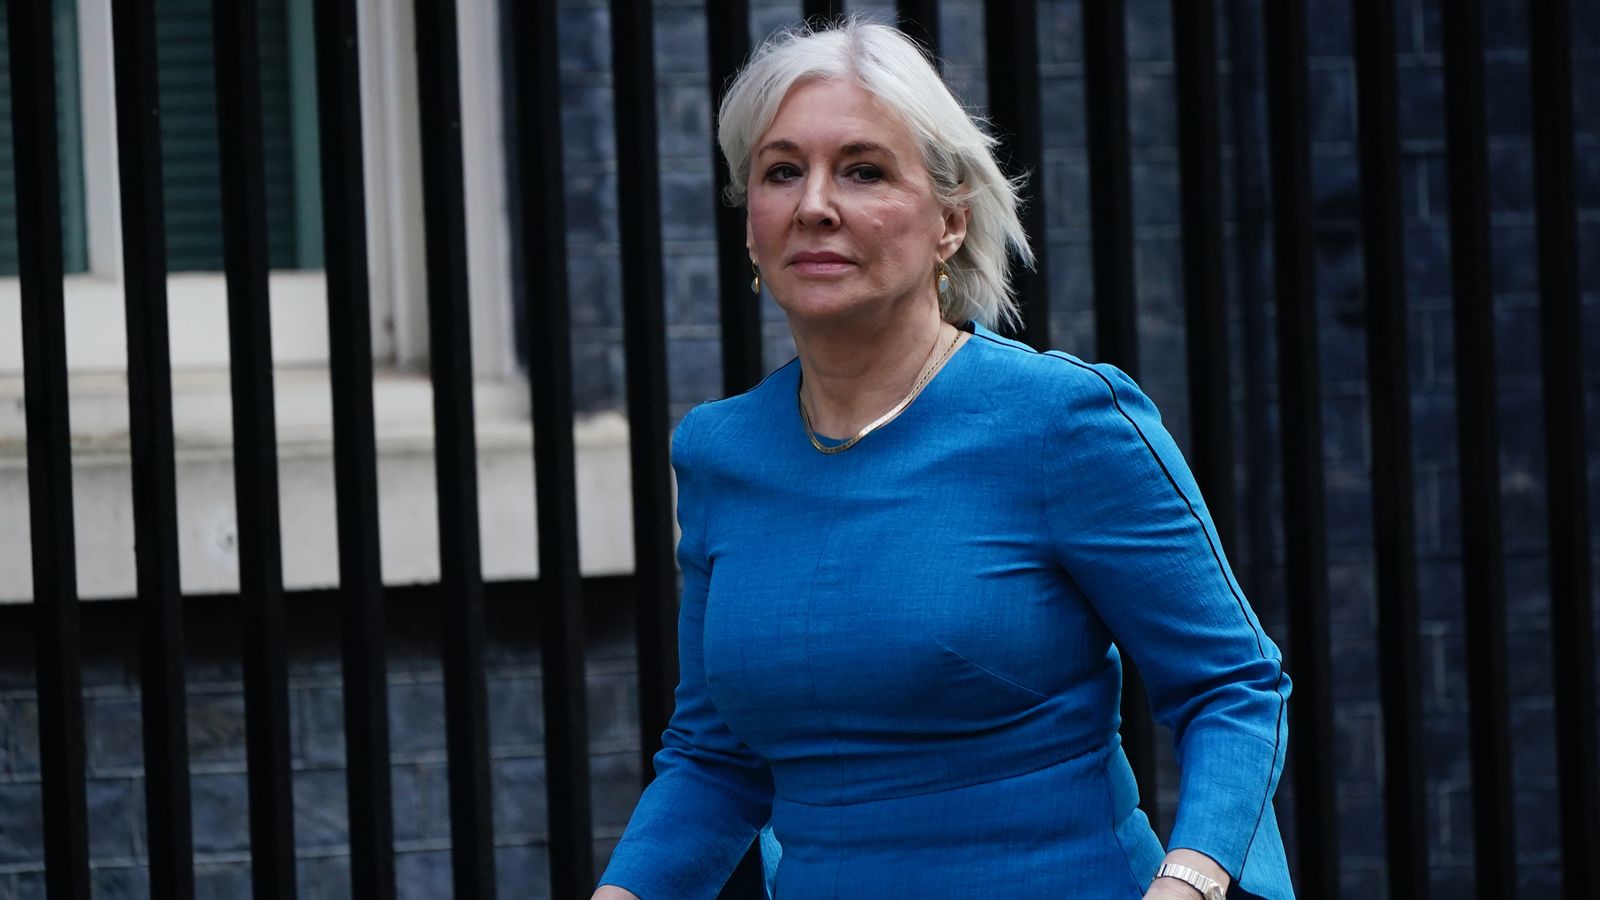 Dorries asked to correct record after claiming Channel 4 faked reality show Tower Block of Commons